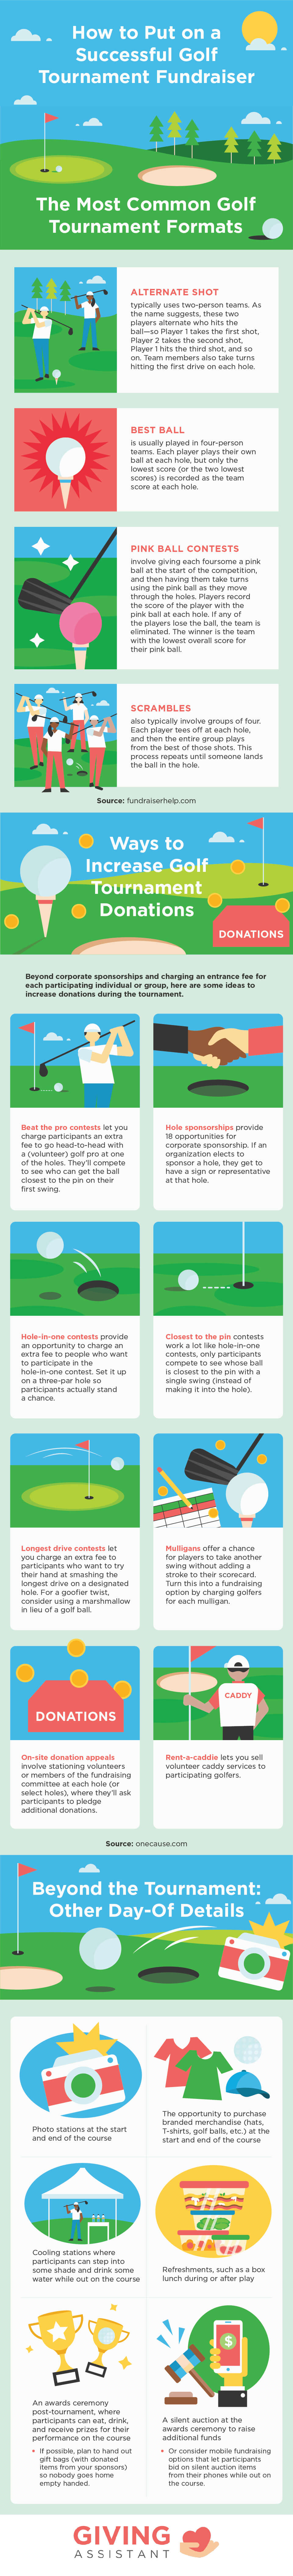 how to put on a golf fundraiser infographic